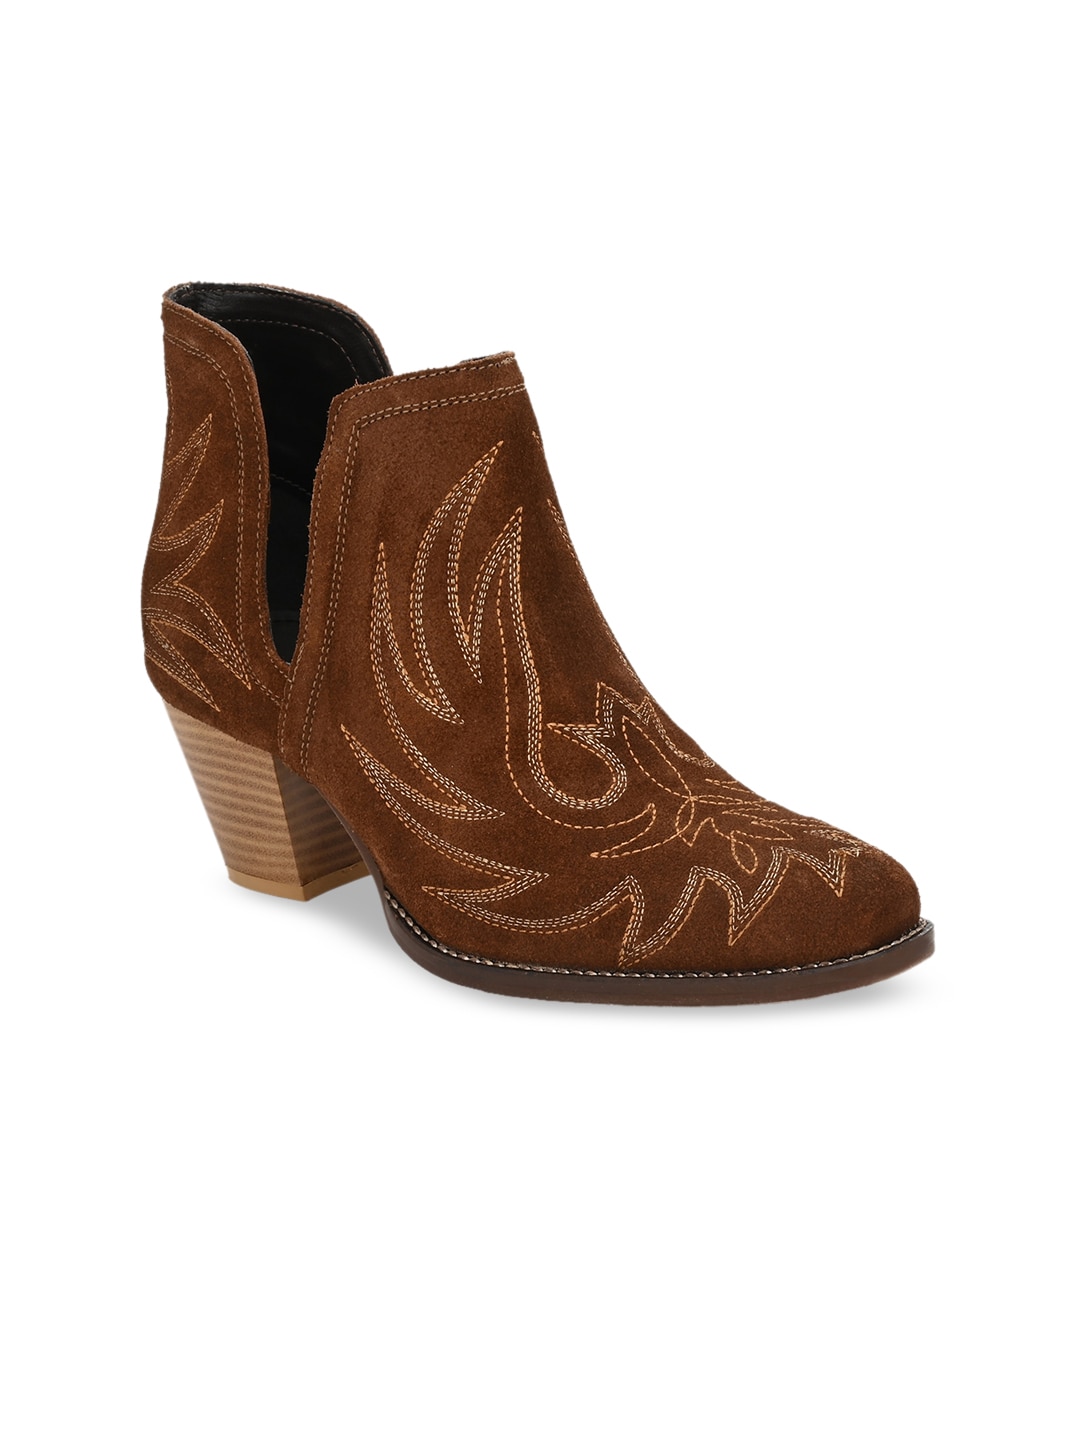 CARLO ROMANO Women Tan Woven Design Mid-Top Suede Heeled Boots Price in India